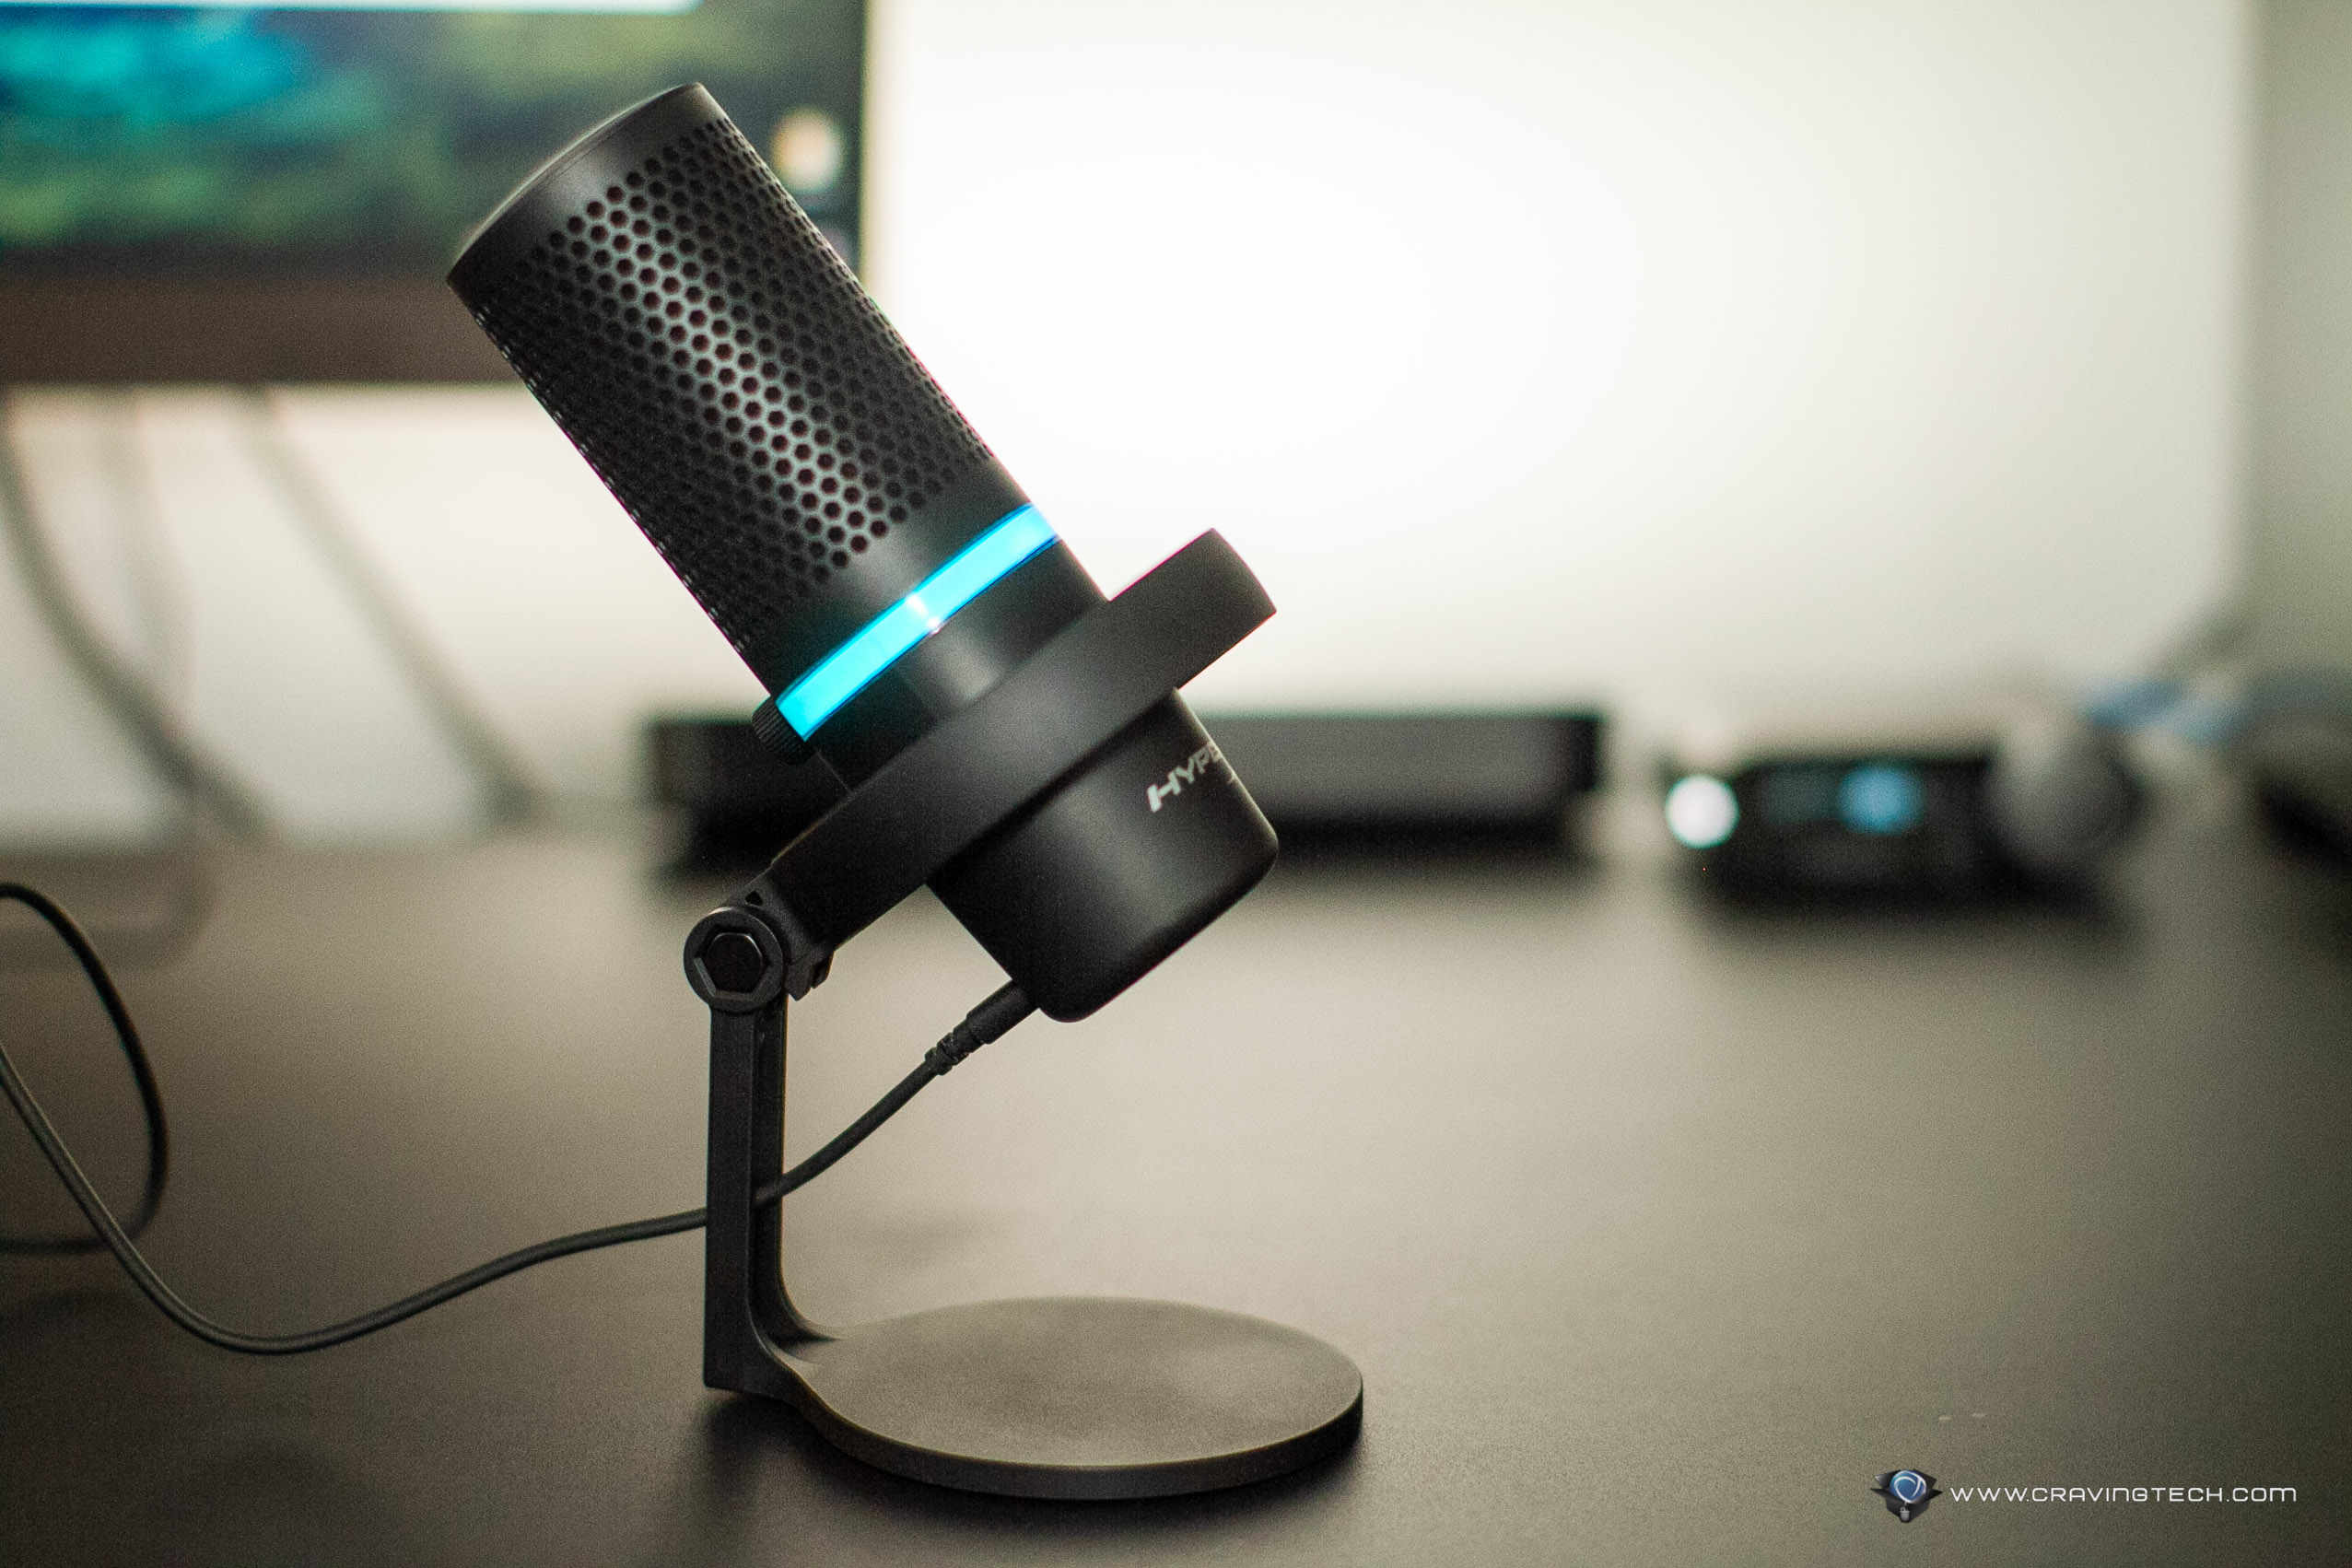 HyperX DuoCast perfectly rounds out its streaming mic line-up [review]